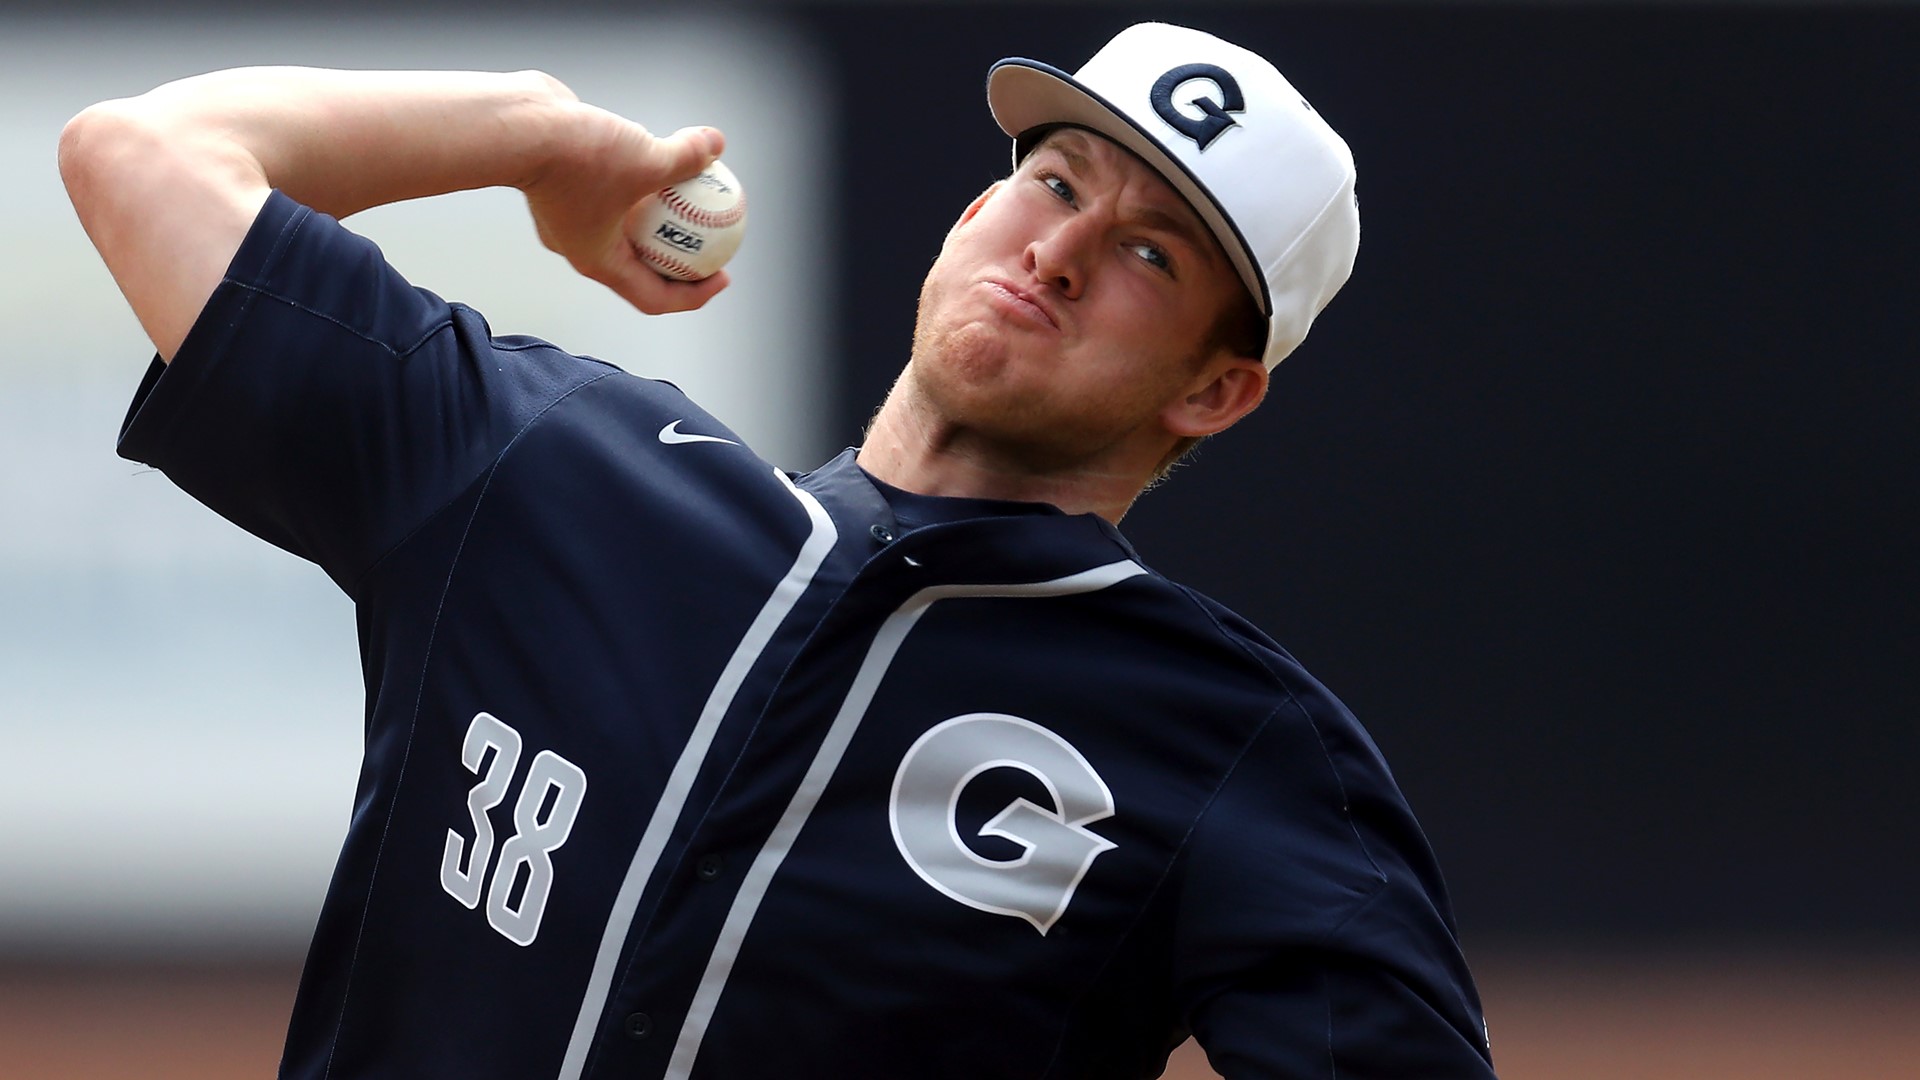 The Georgetown baseball team was told on Friday they are cleared to start their 2021 baseball season.